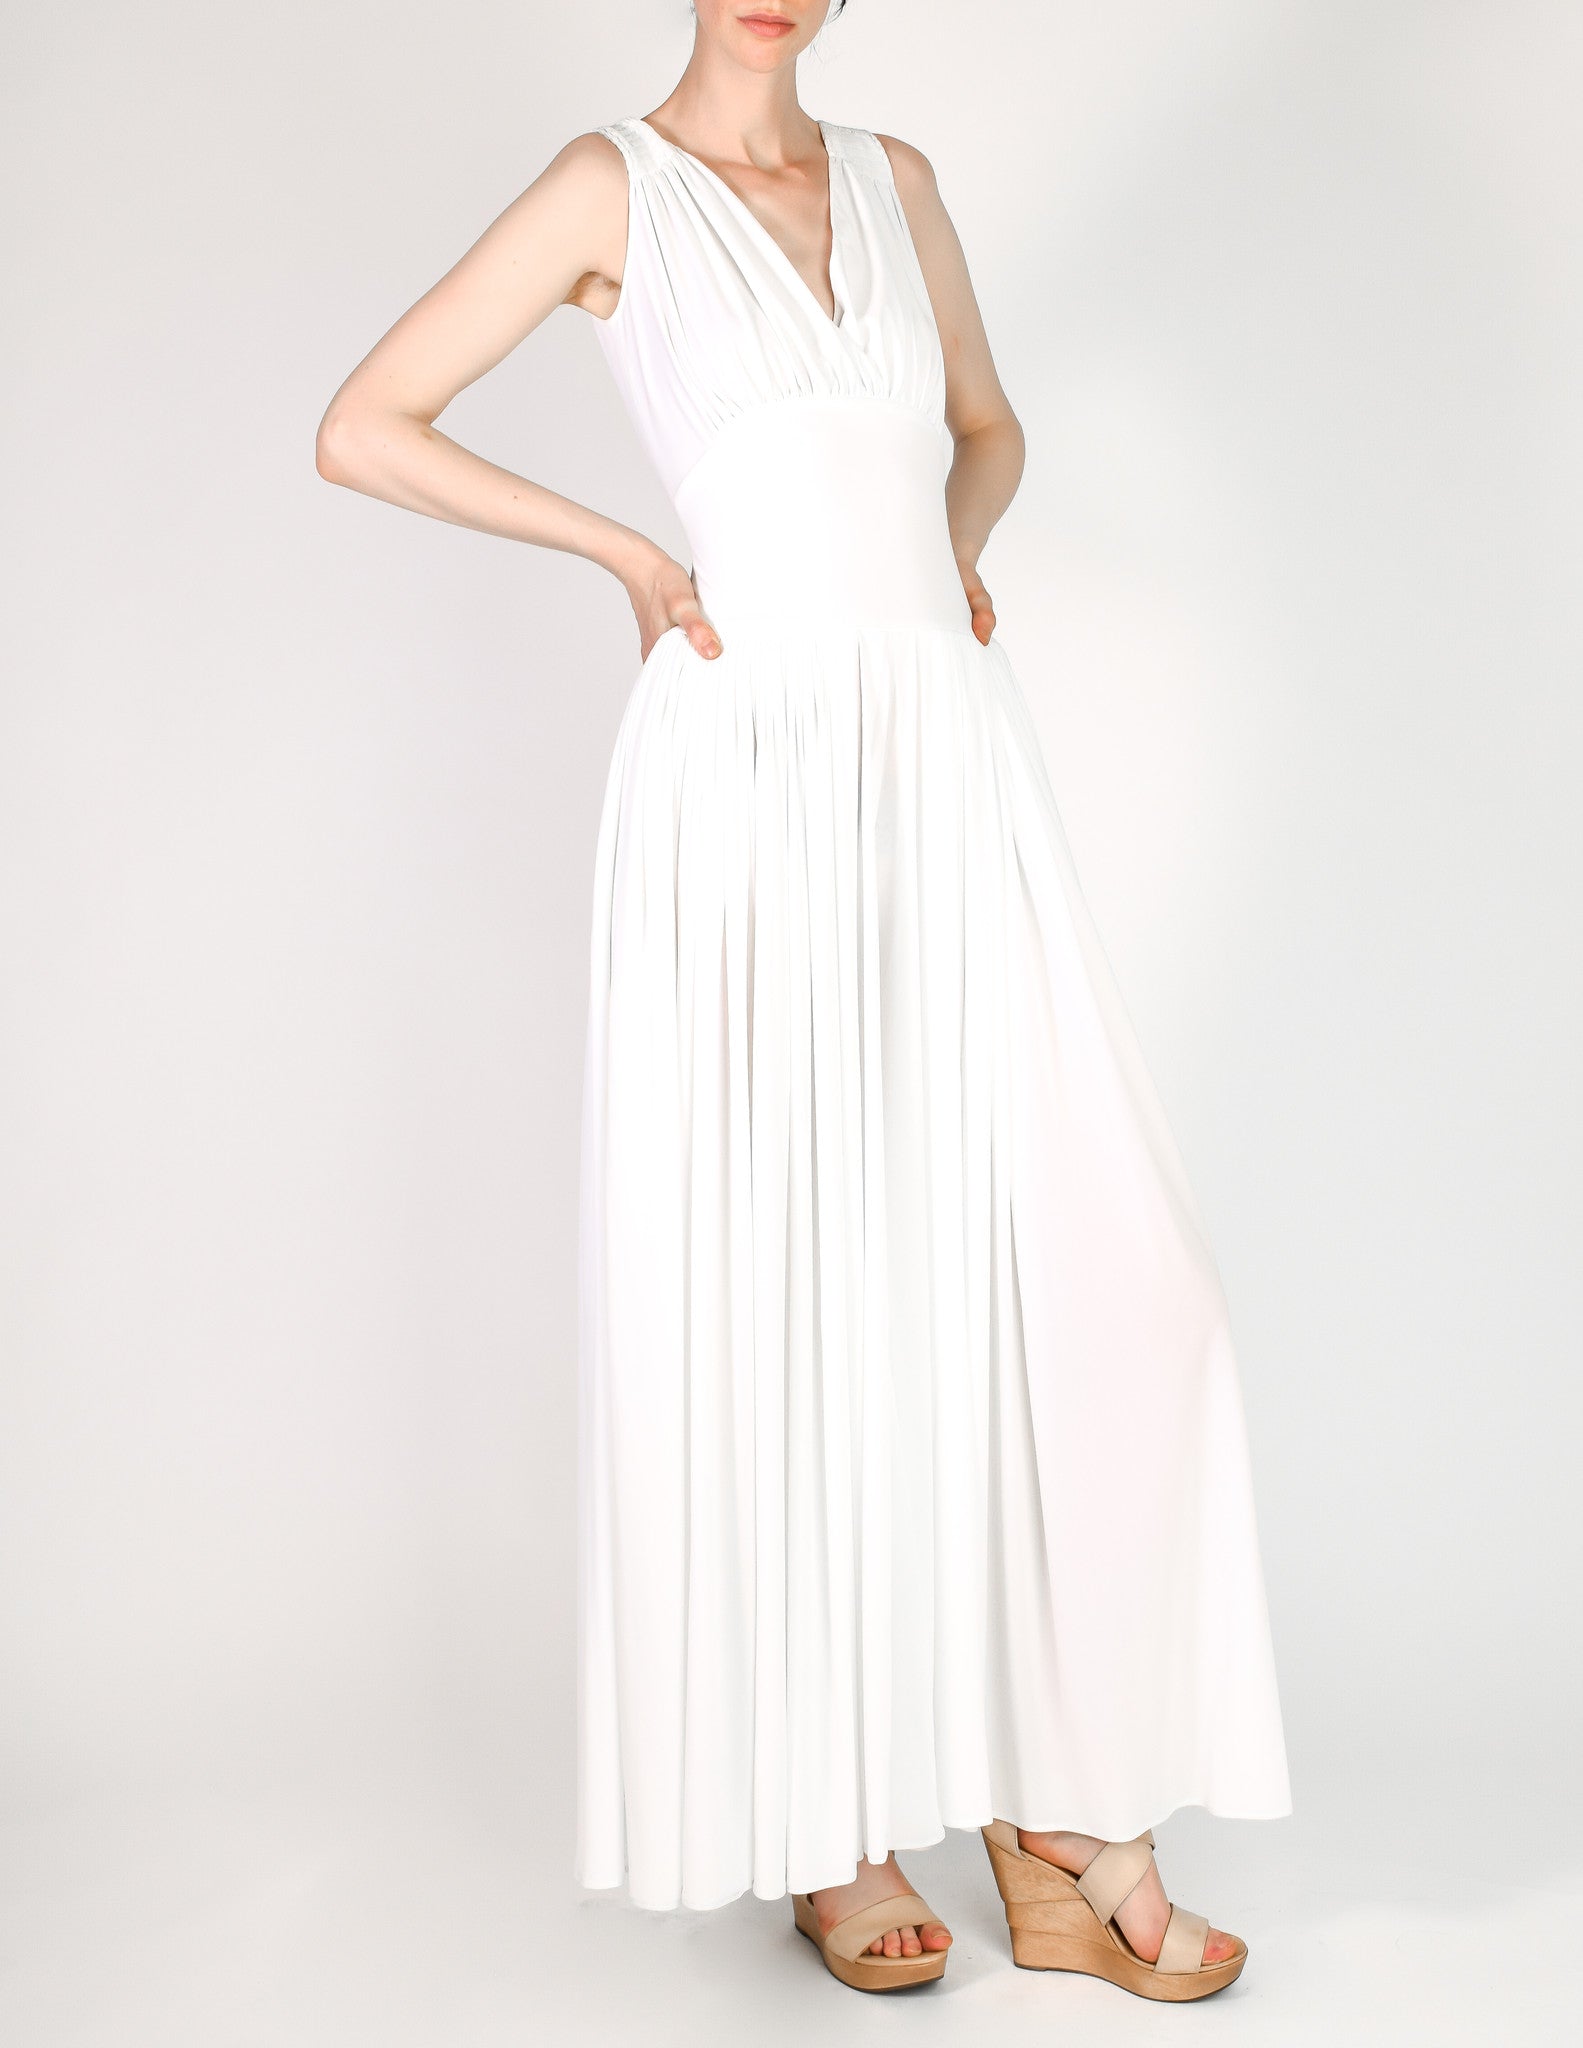 Norma Kamali Vintage White Palazzo Jumpsuit - from Amarcord Vintage Fashion